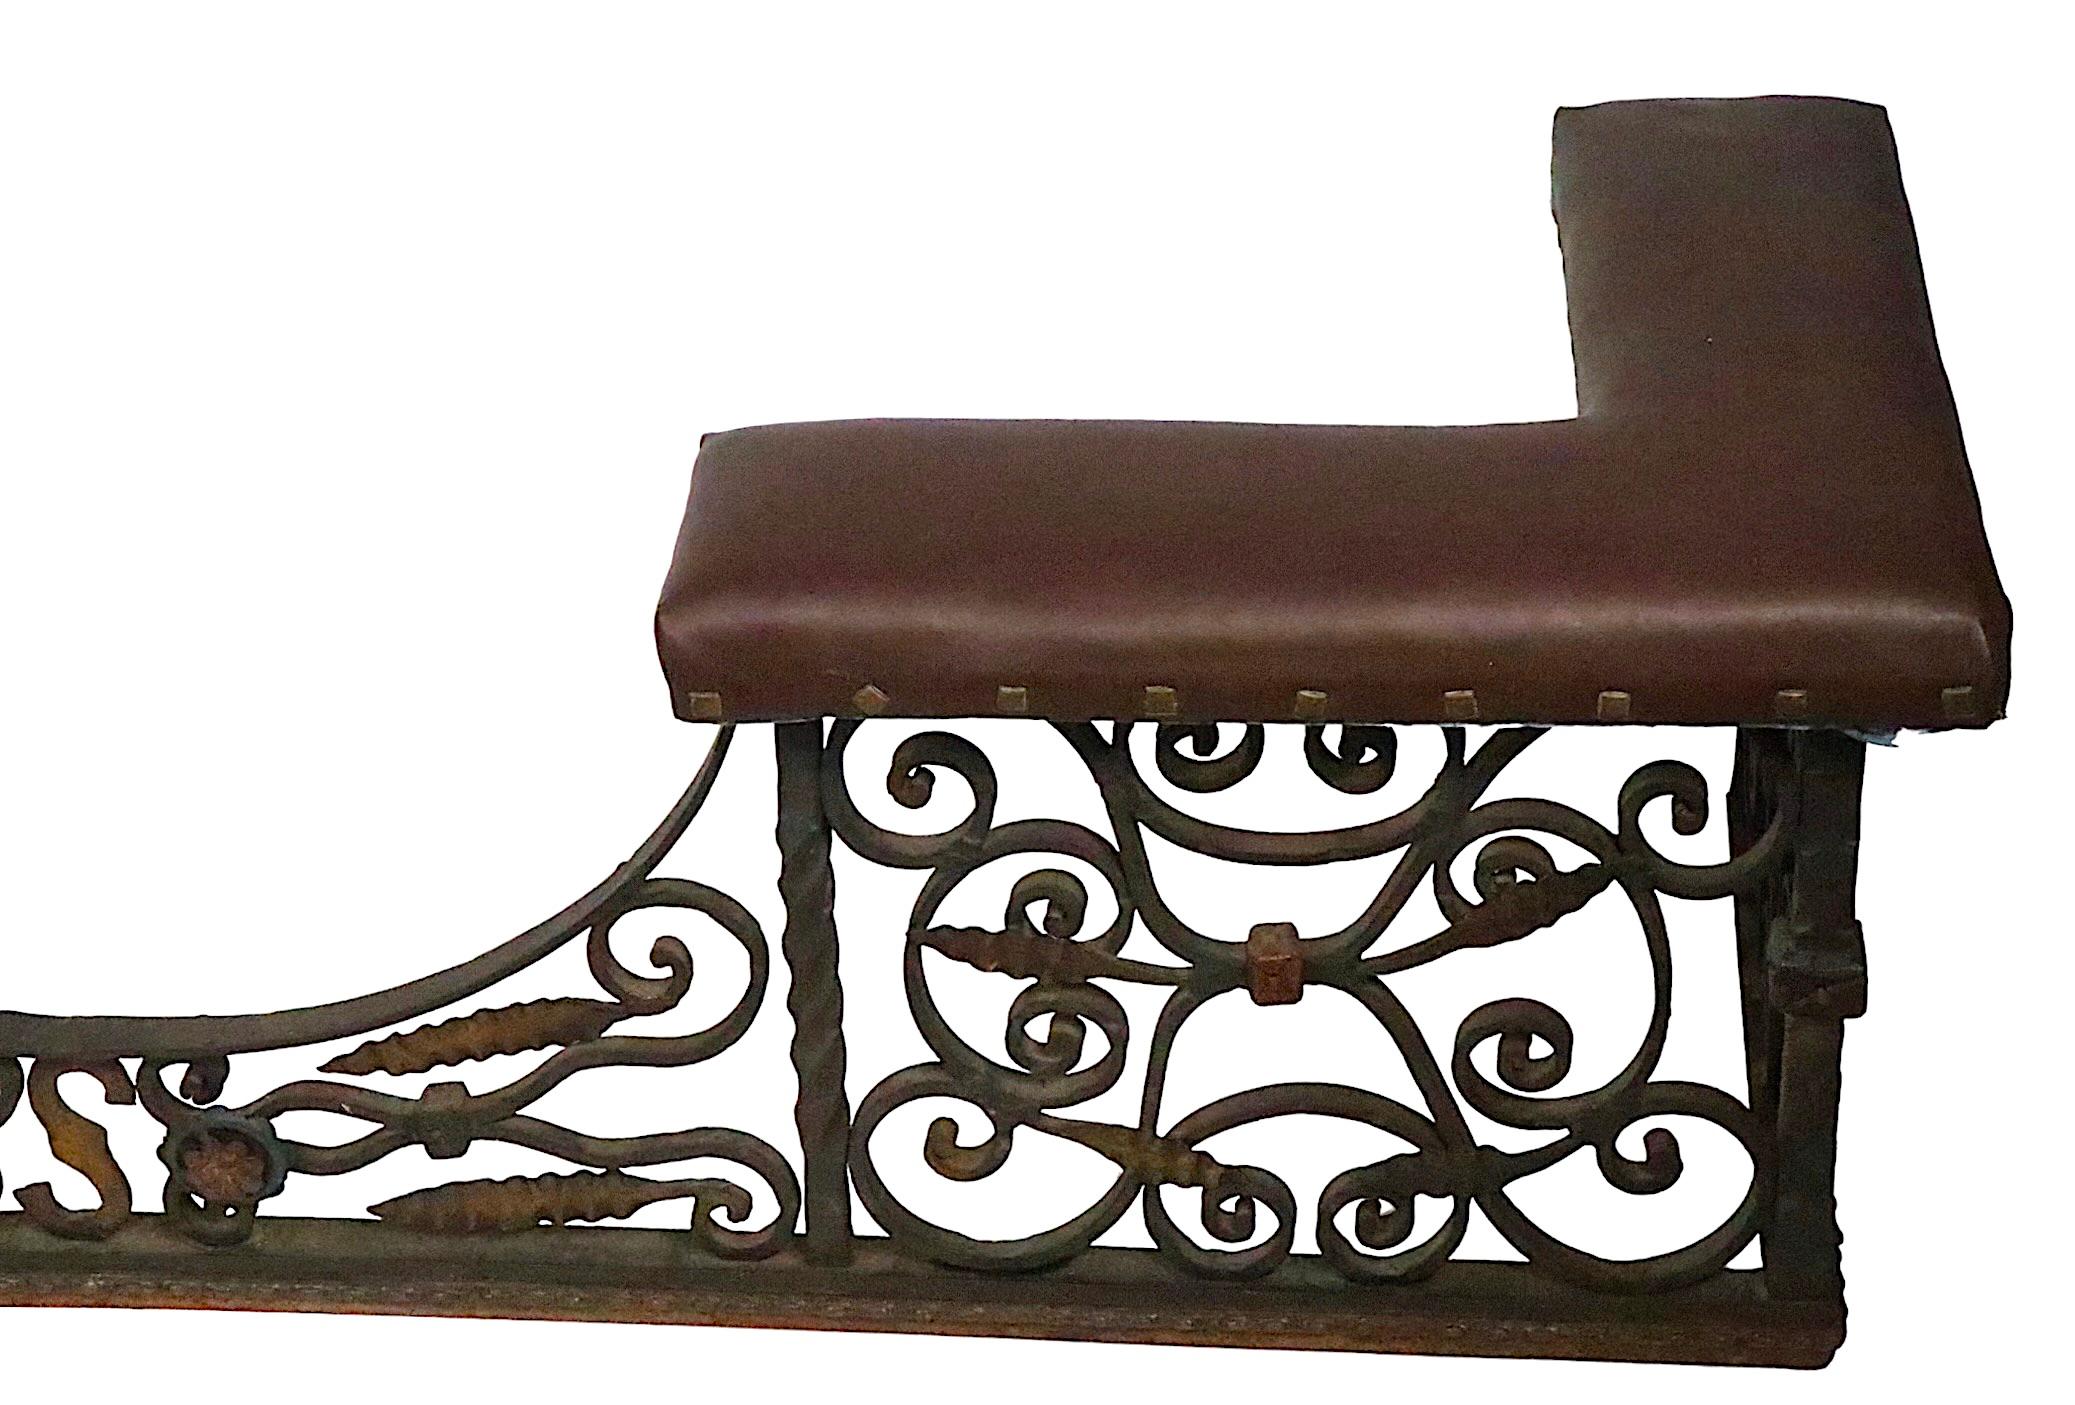 Antique Arts and Crafts Gothic Spanish Style Wrought Iron Bench Club Fender For Sale 3